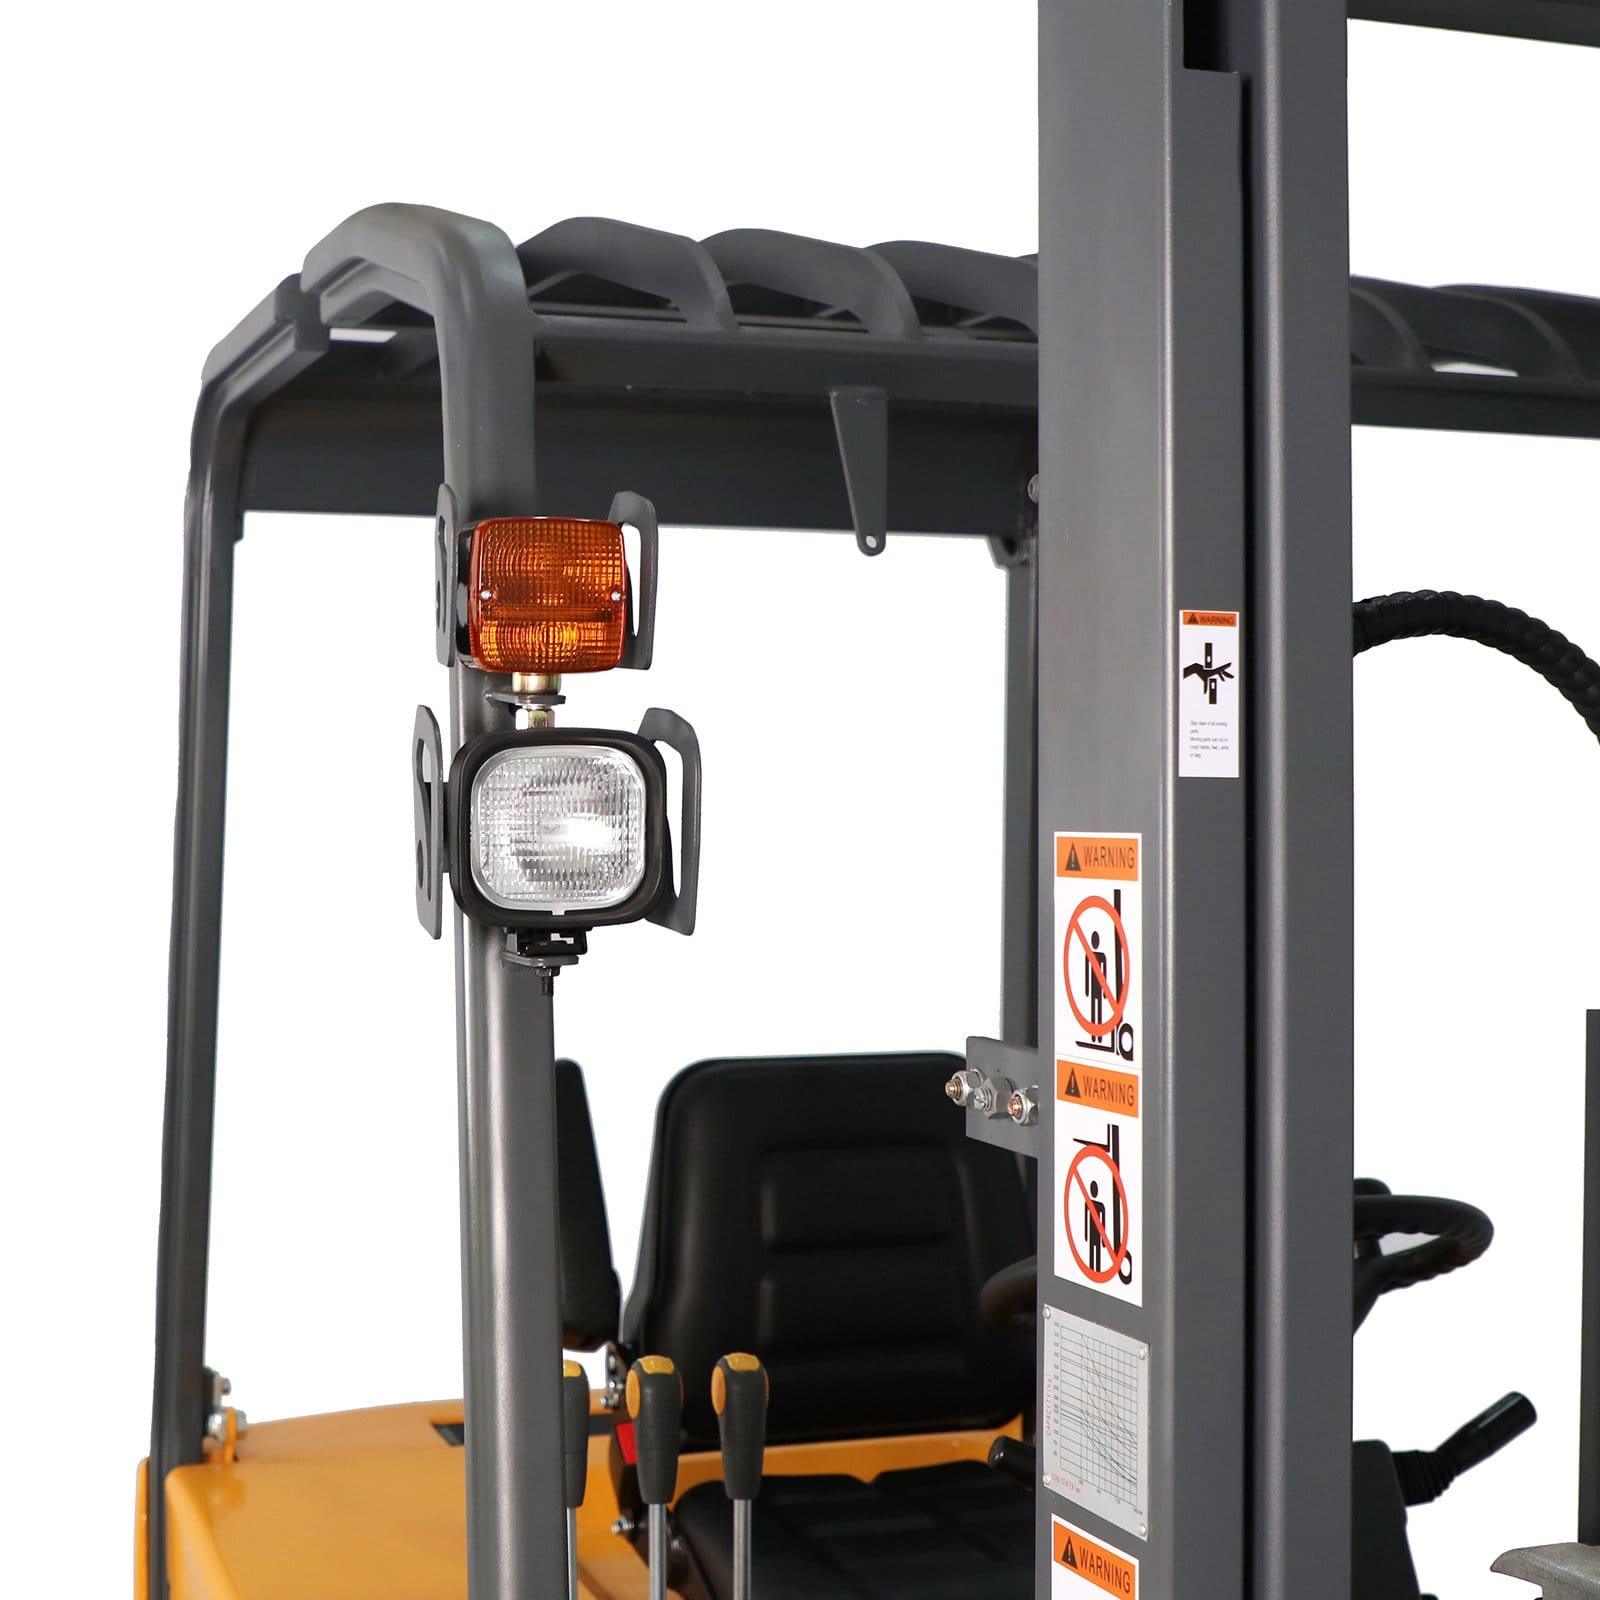 ApolloLift | 3 Wheels Lithium-ion Battery Forklift 4400lbs Cap. 220" Lifting A-4002